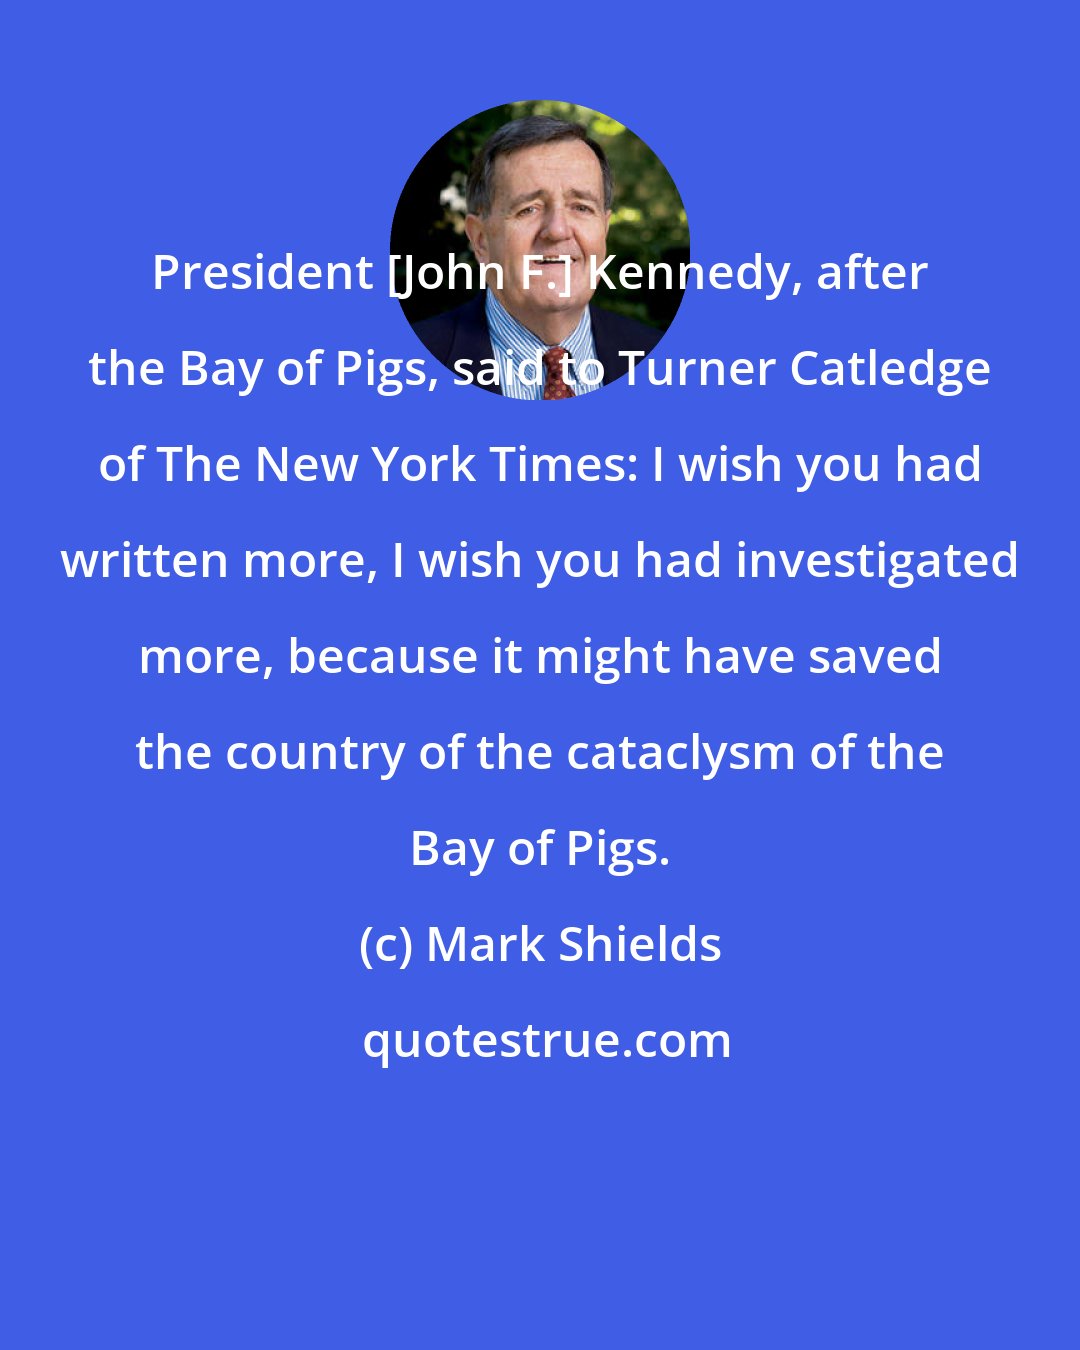 Mark Shields: President [John F.] Kennedy, after the Bay of Pigs, said to Turner Catledge of The New York Times: I wish you had written more, I wish you had investigated more, because it might have saved the country of the cataclysm of the Bay of Pigs.